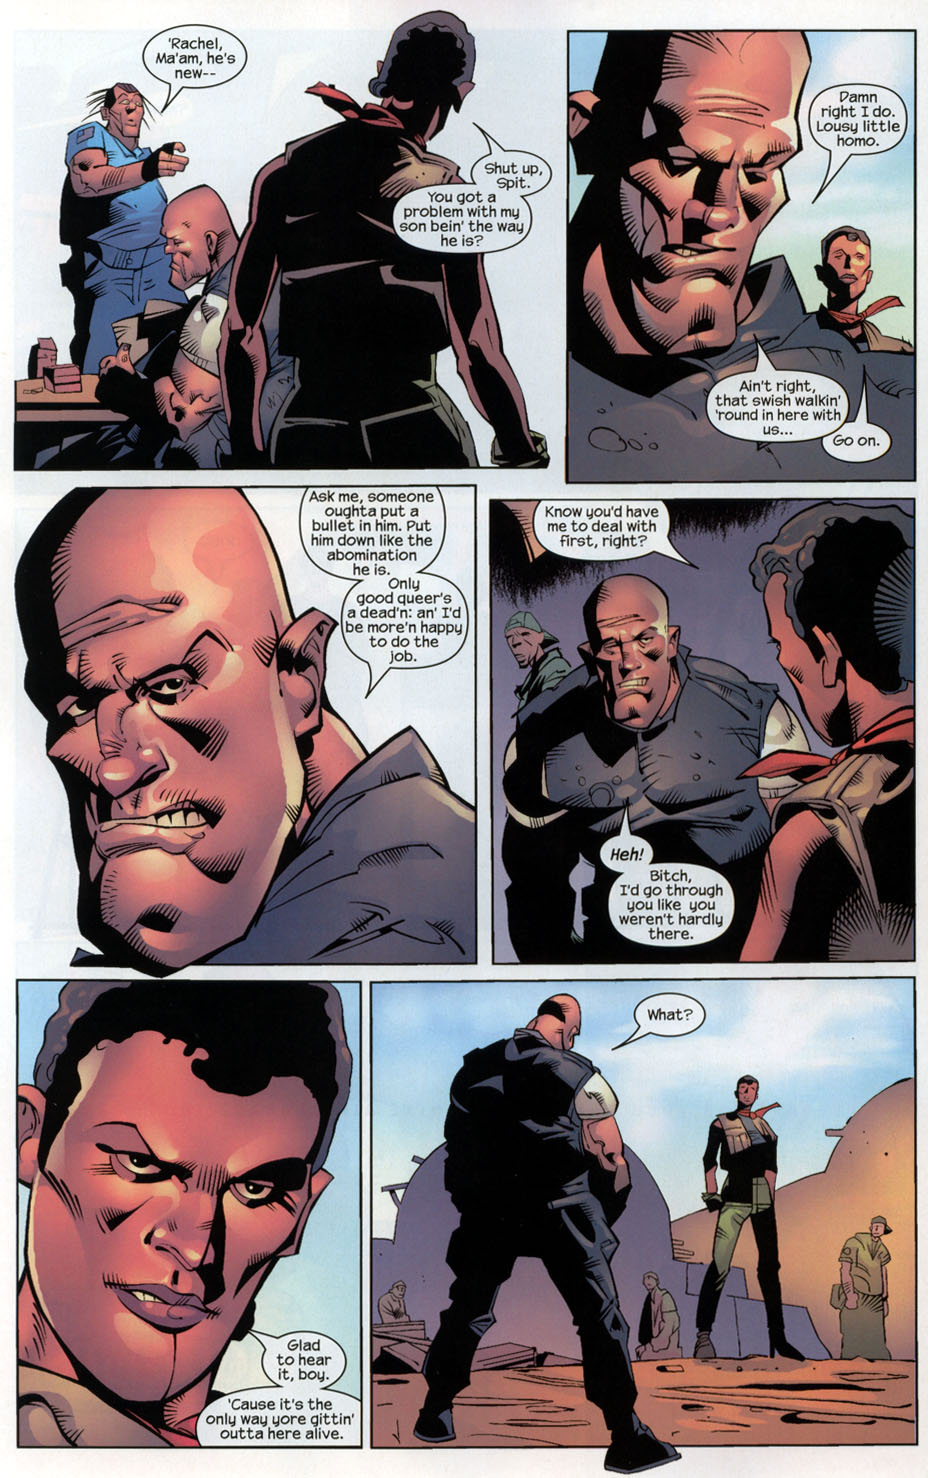 The Punisher (2001) issue 29 - Streets of Laredo #02 - Page 6